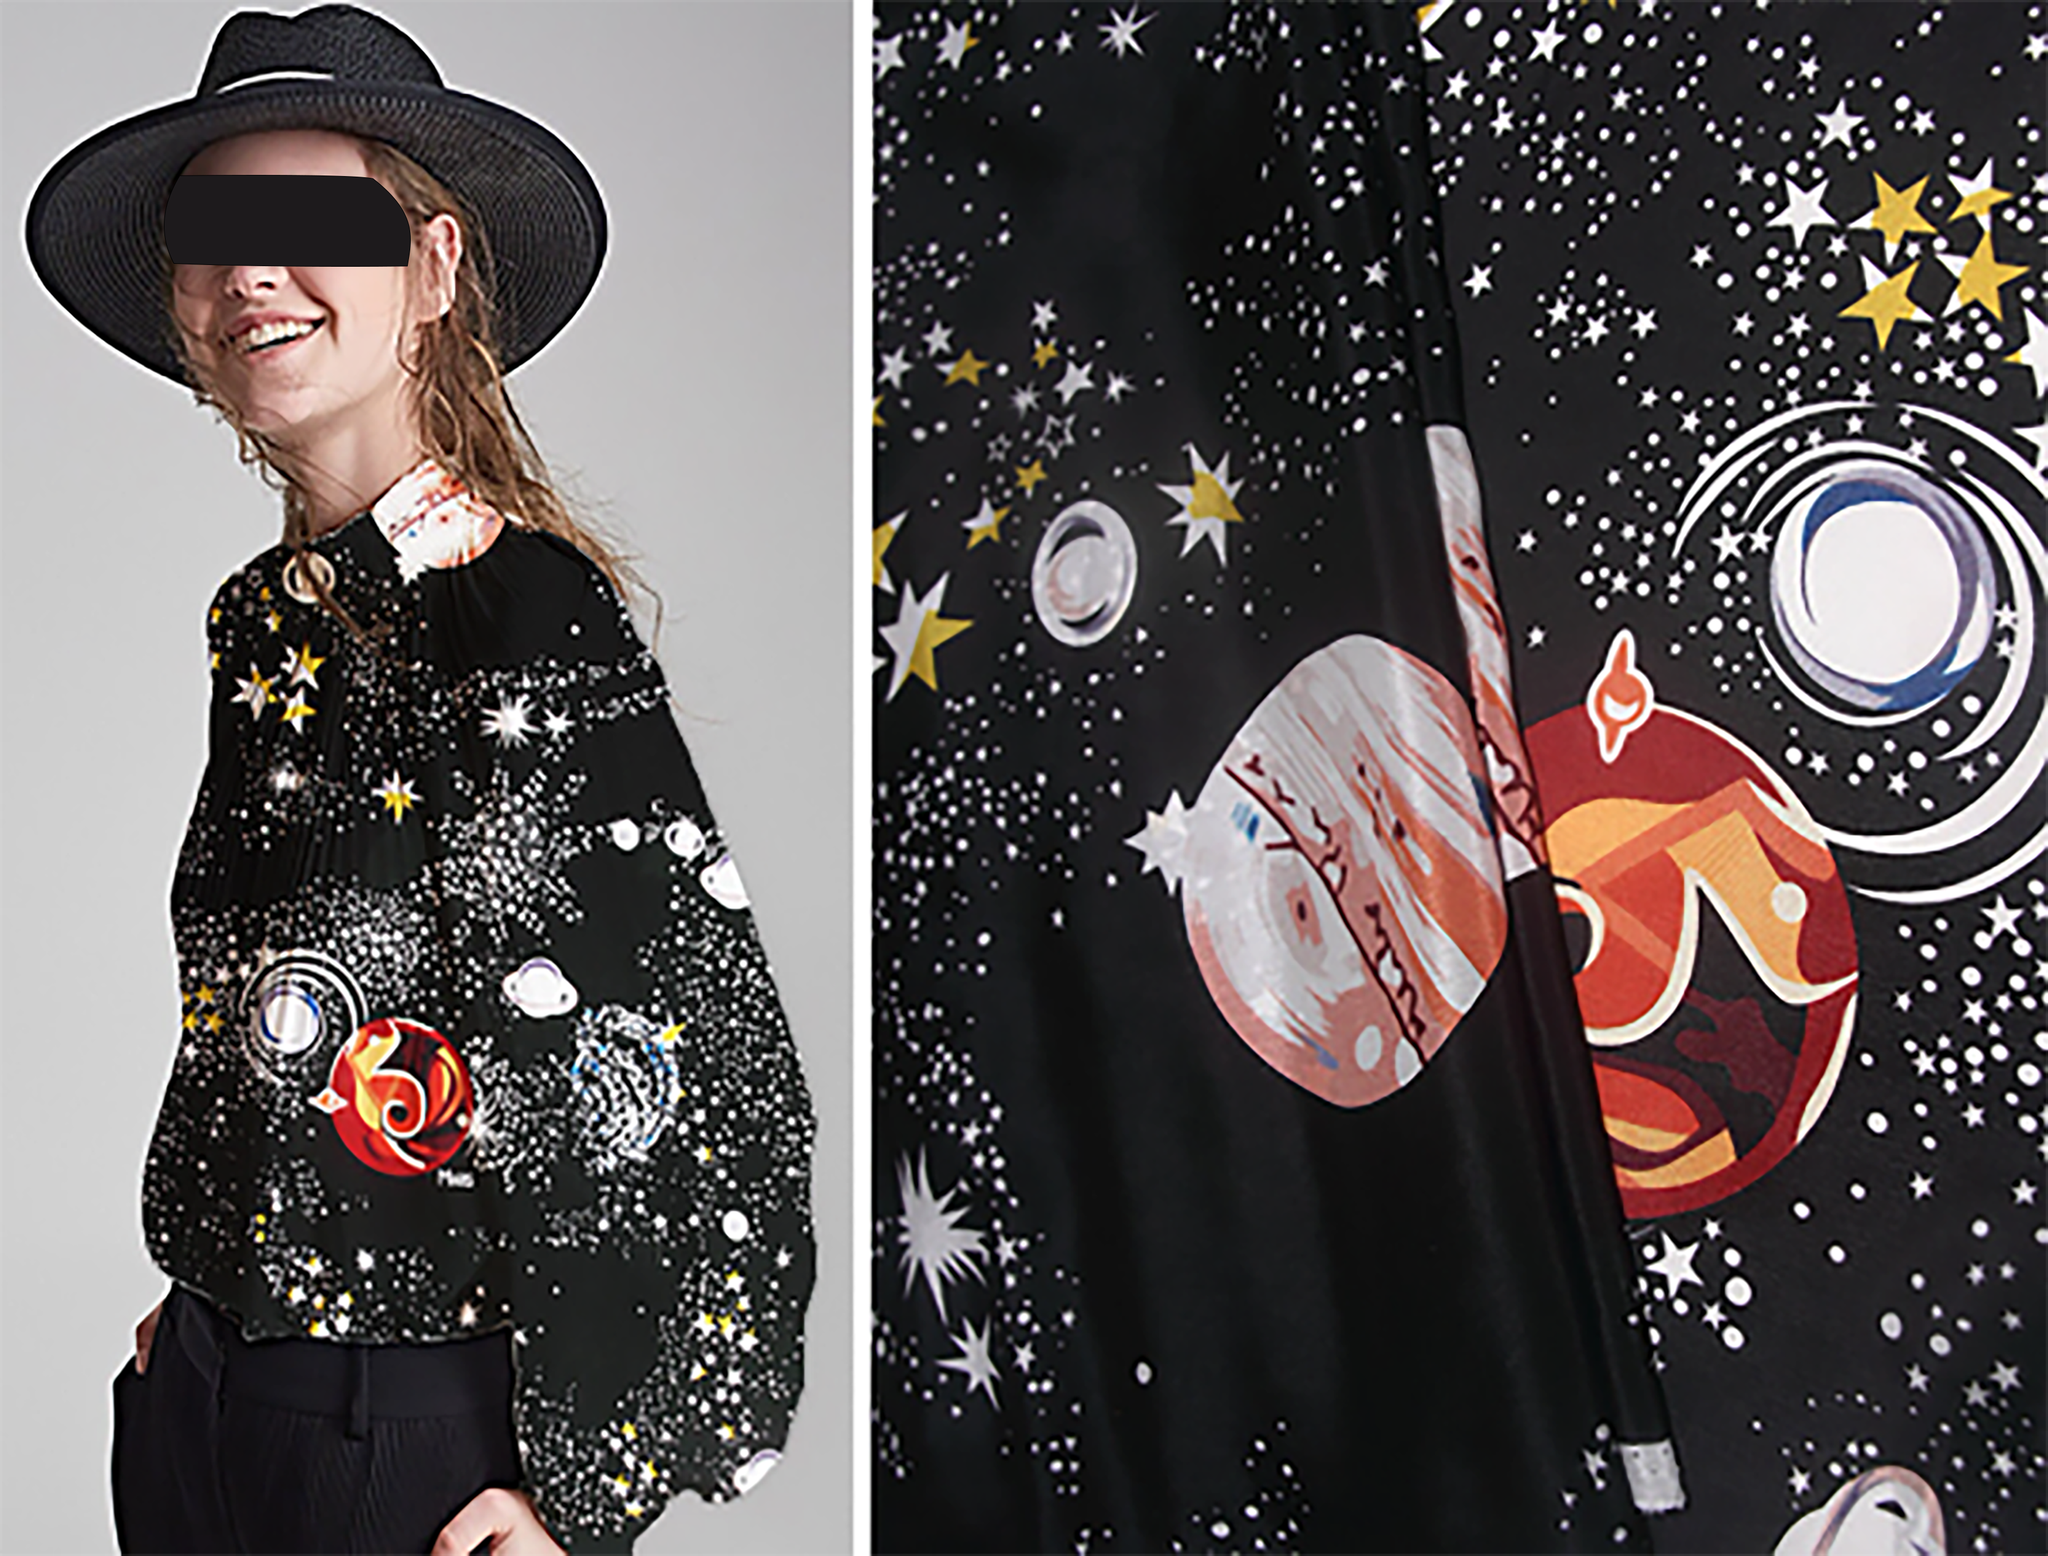 Starry Night Print on Black Background - Mulberry Silk Double Crepe de Chine, 16 mm - 108 cm Wide